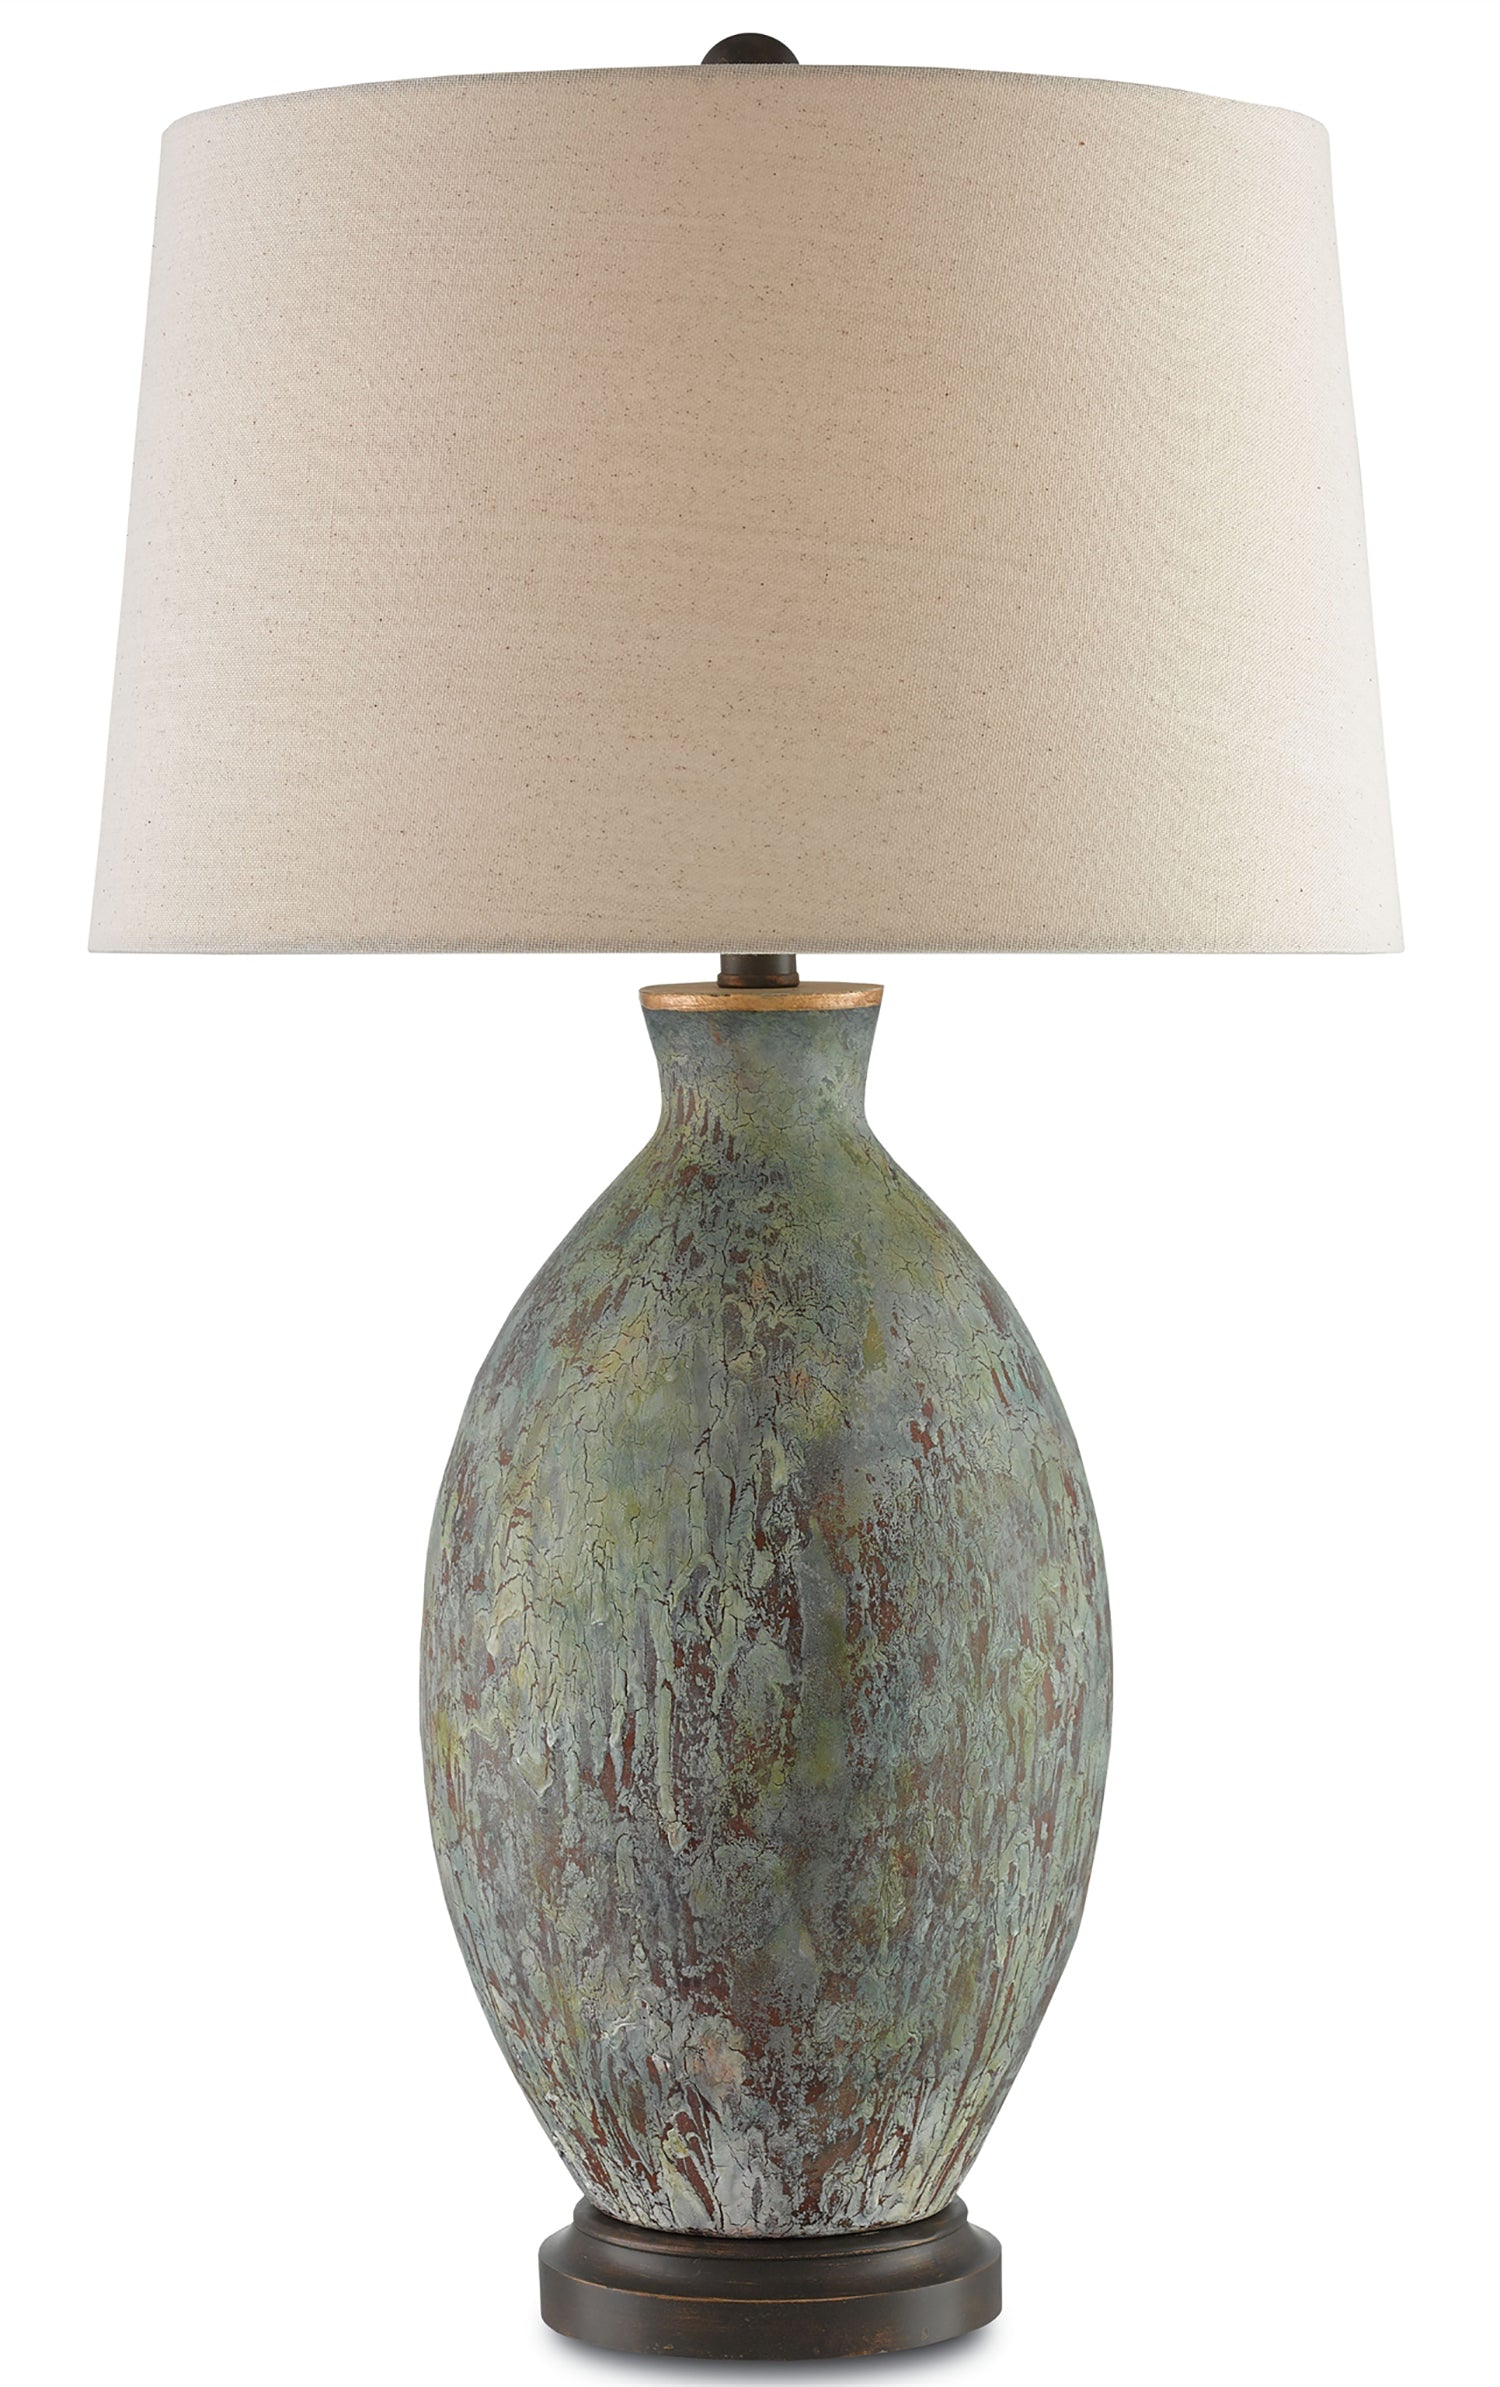 Currey and Company 6000-0050 Remi Table Lamp - Green, Dark Red, Bronze Gold